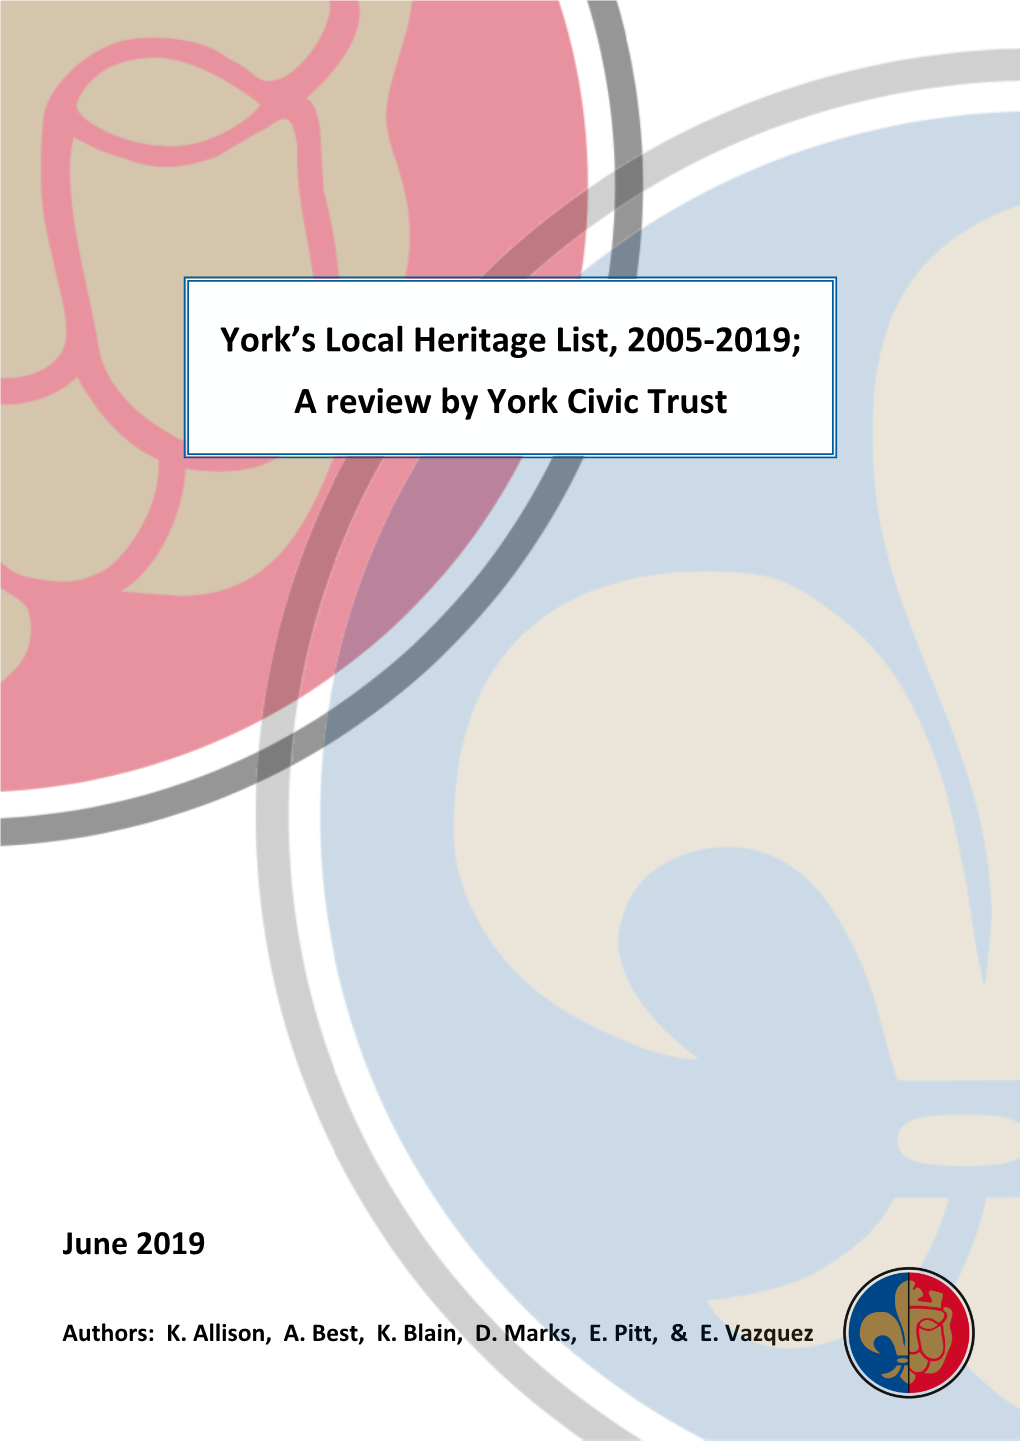 York's Local Heritage List: a Review, 2005-2019